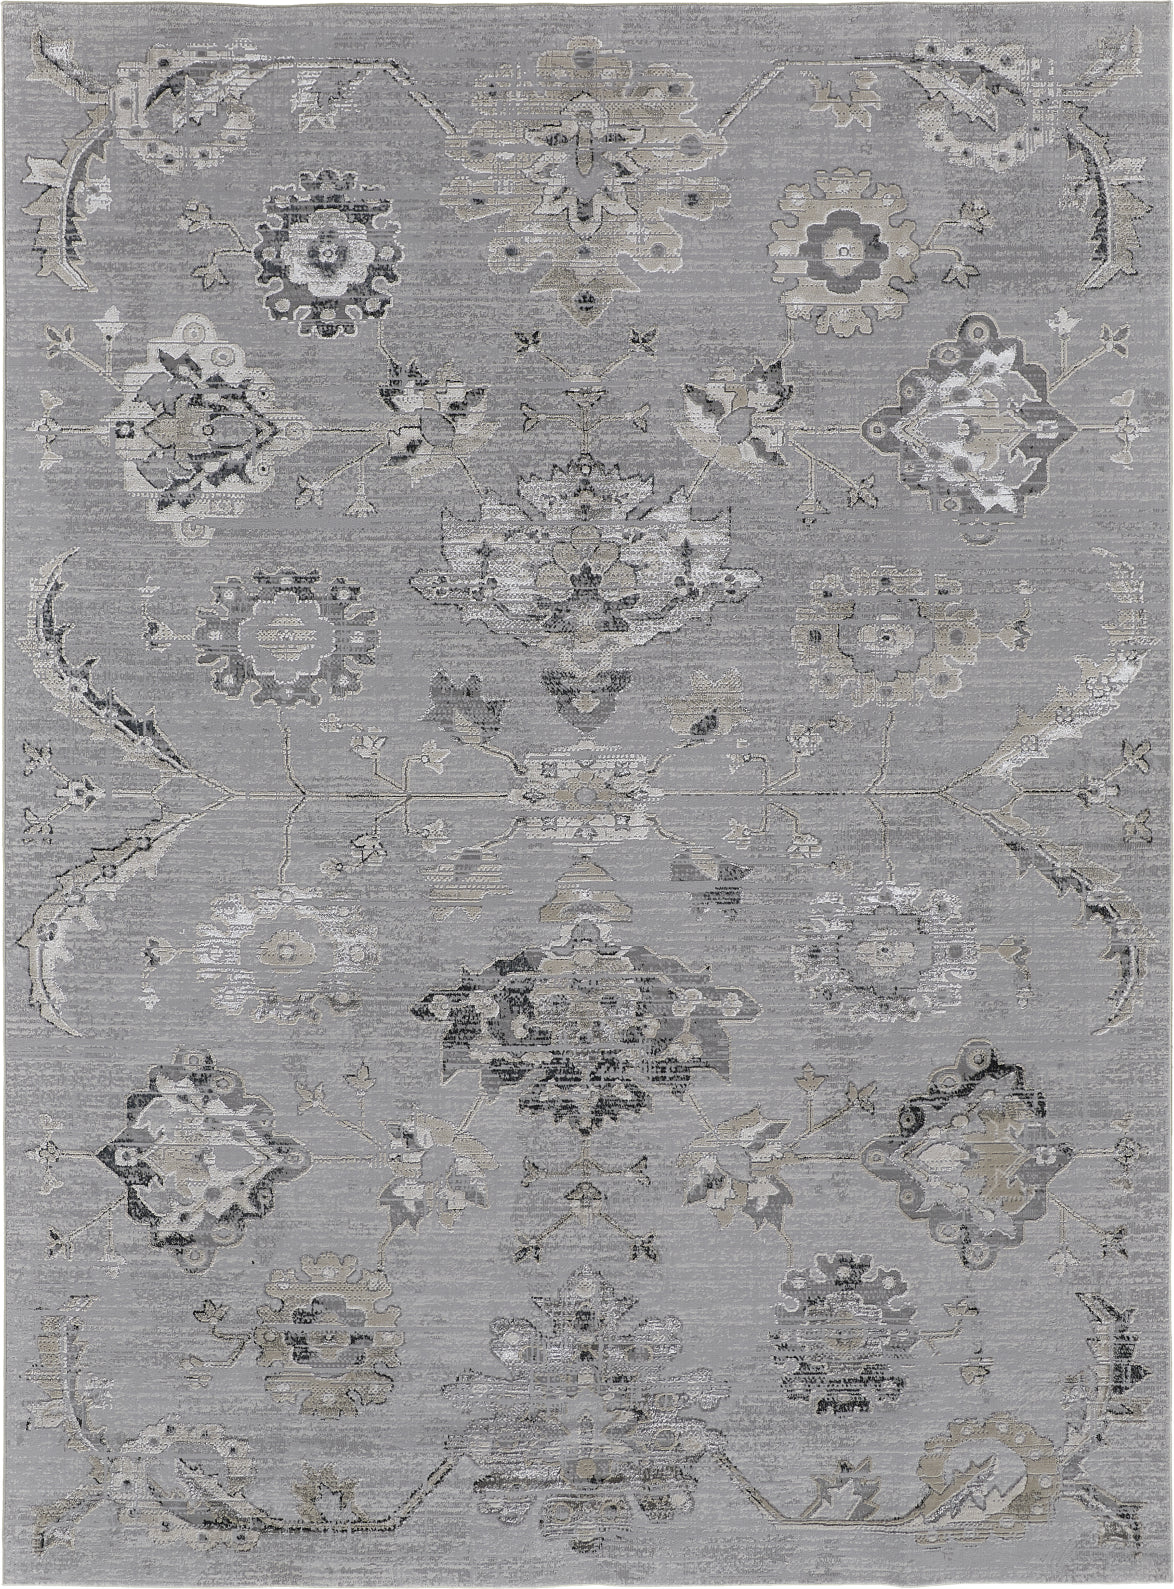 Feizy Macklaine 39FQF Silver/Beige Area Rug main image